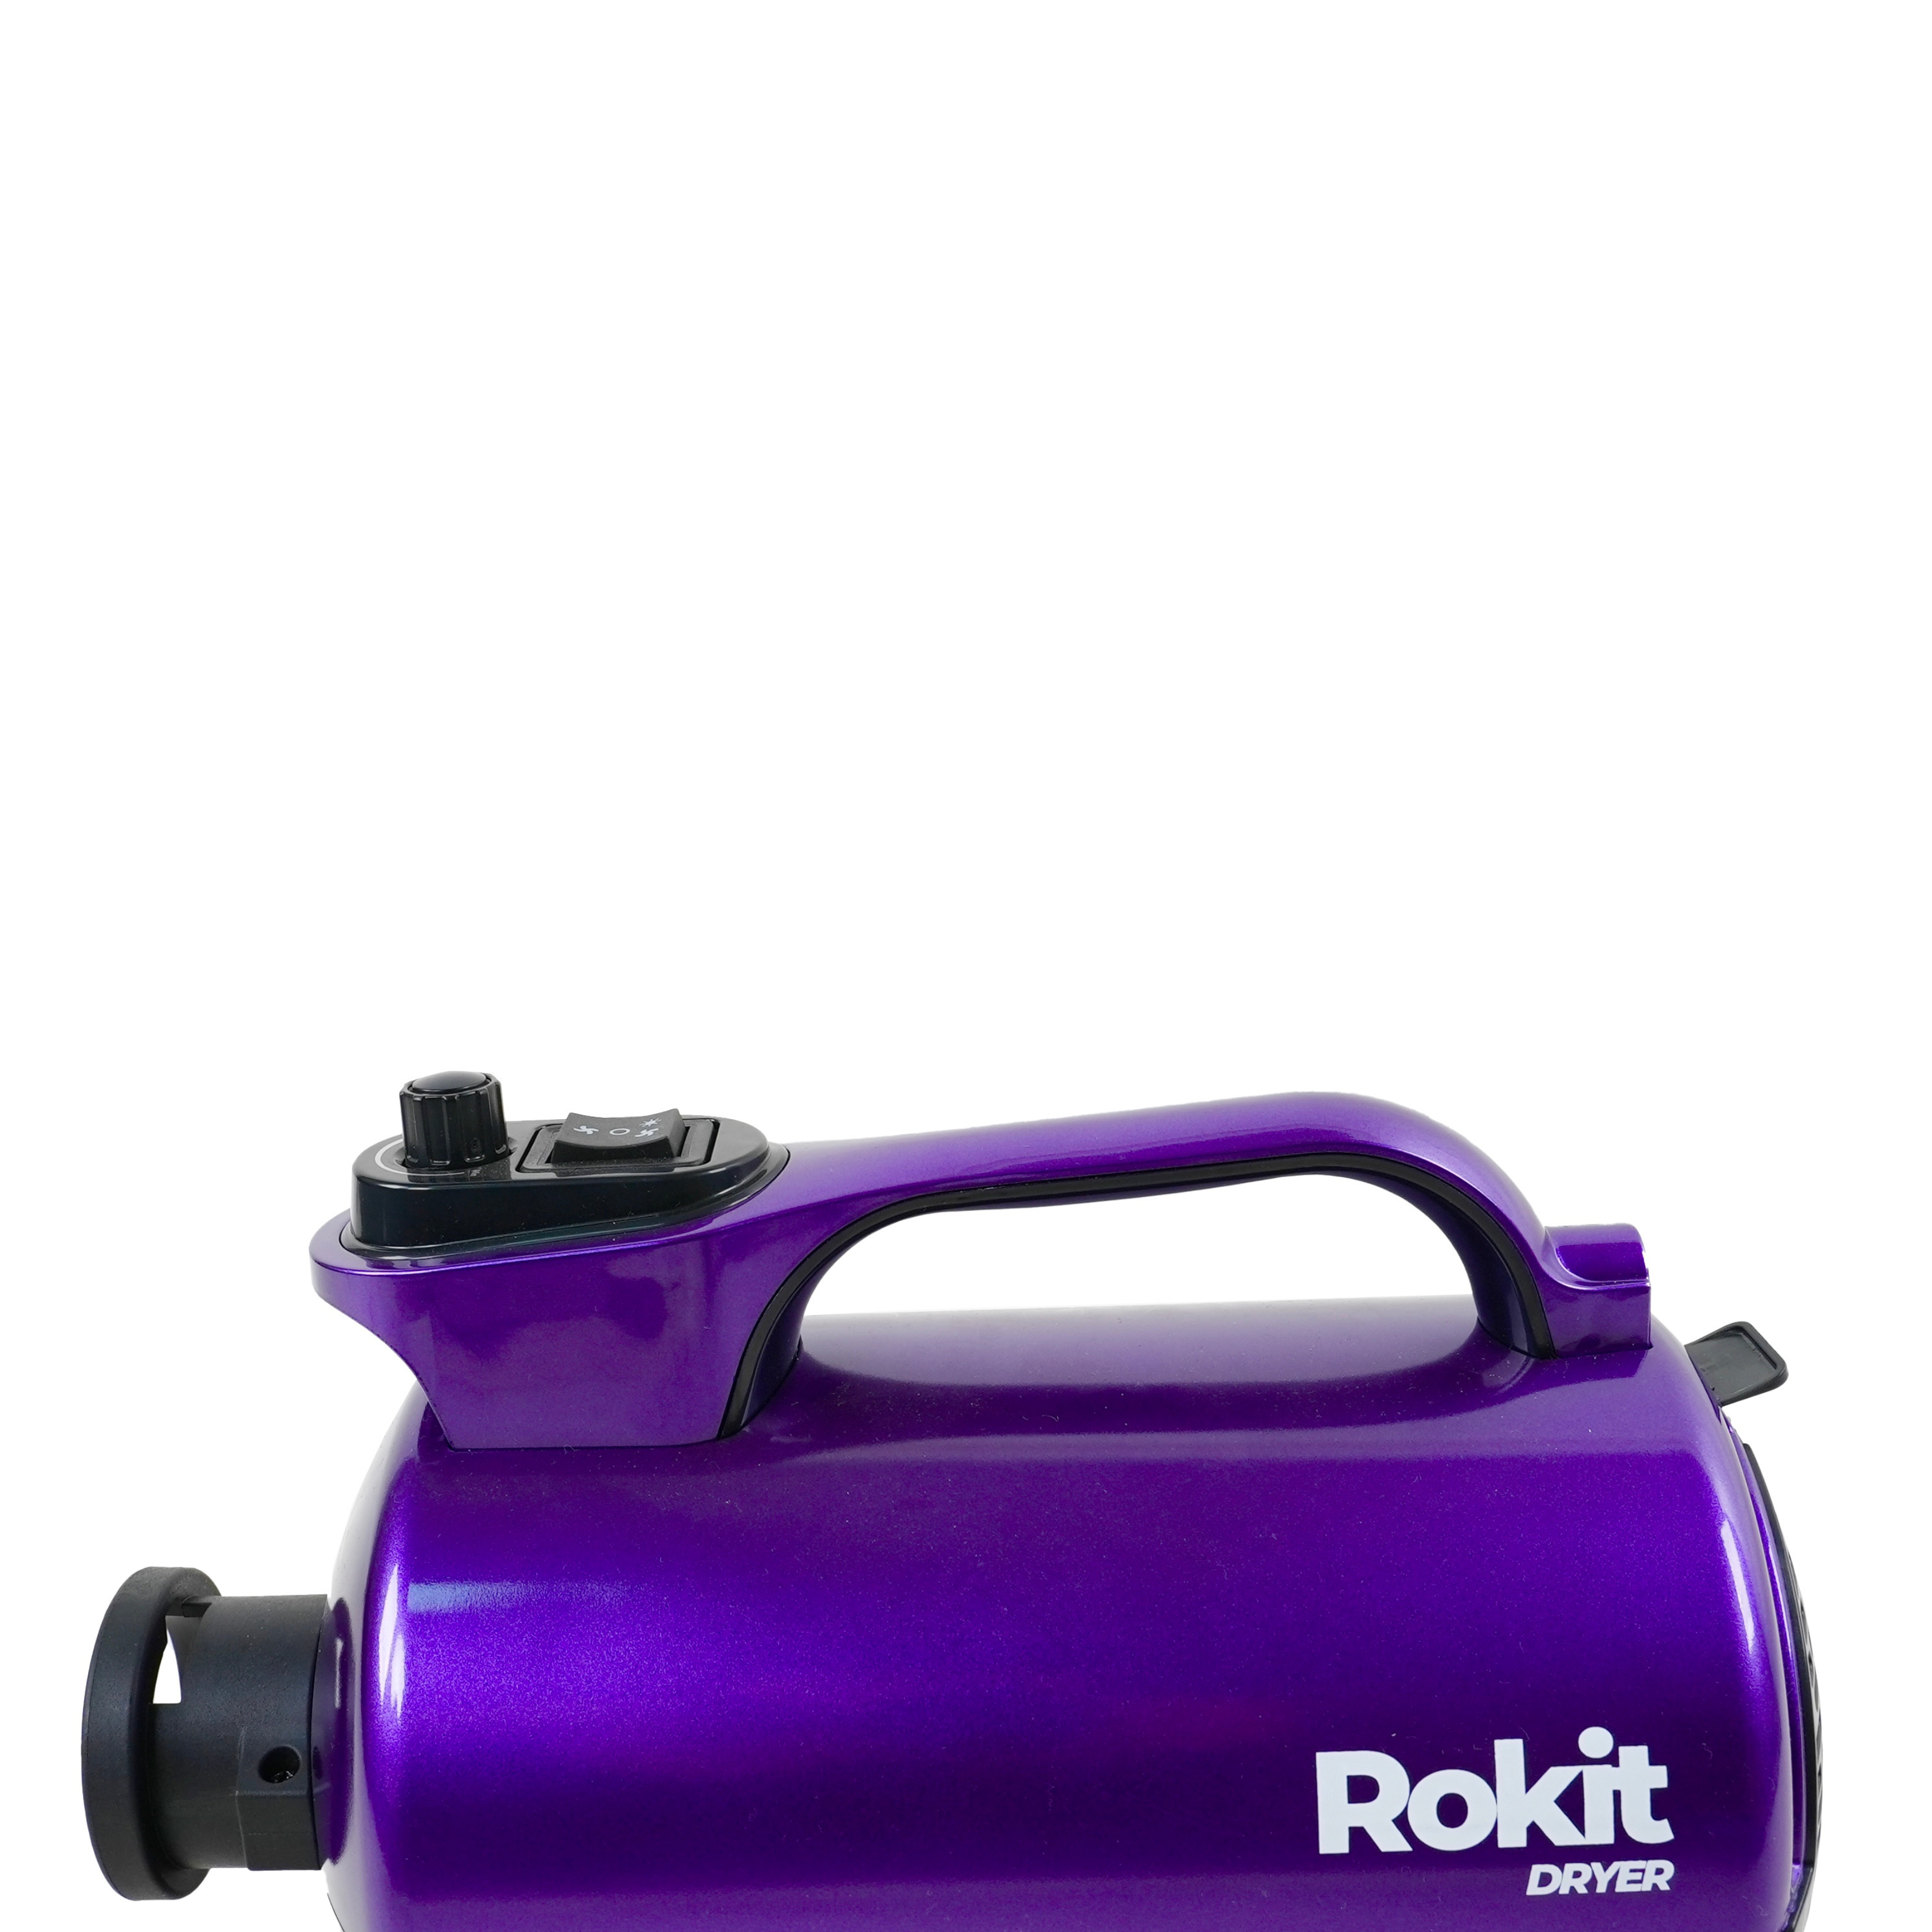 Rokit Resolution 1 (R1) Car Dryer / Forced Air Vehicle Dryer